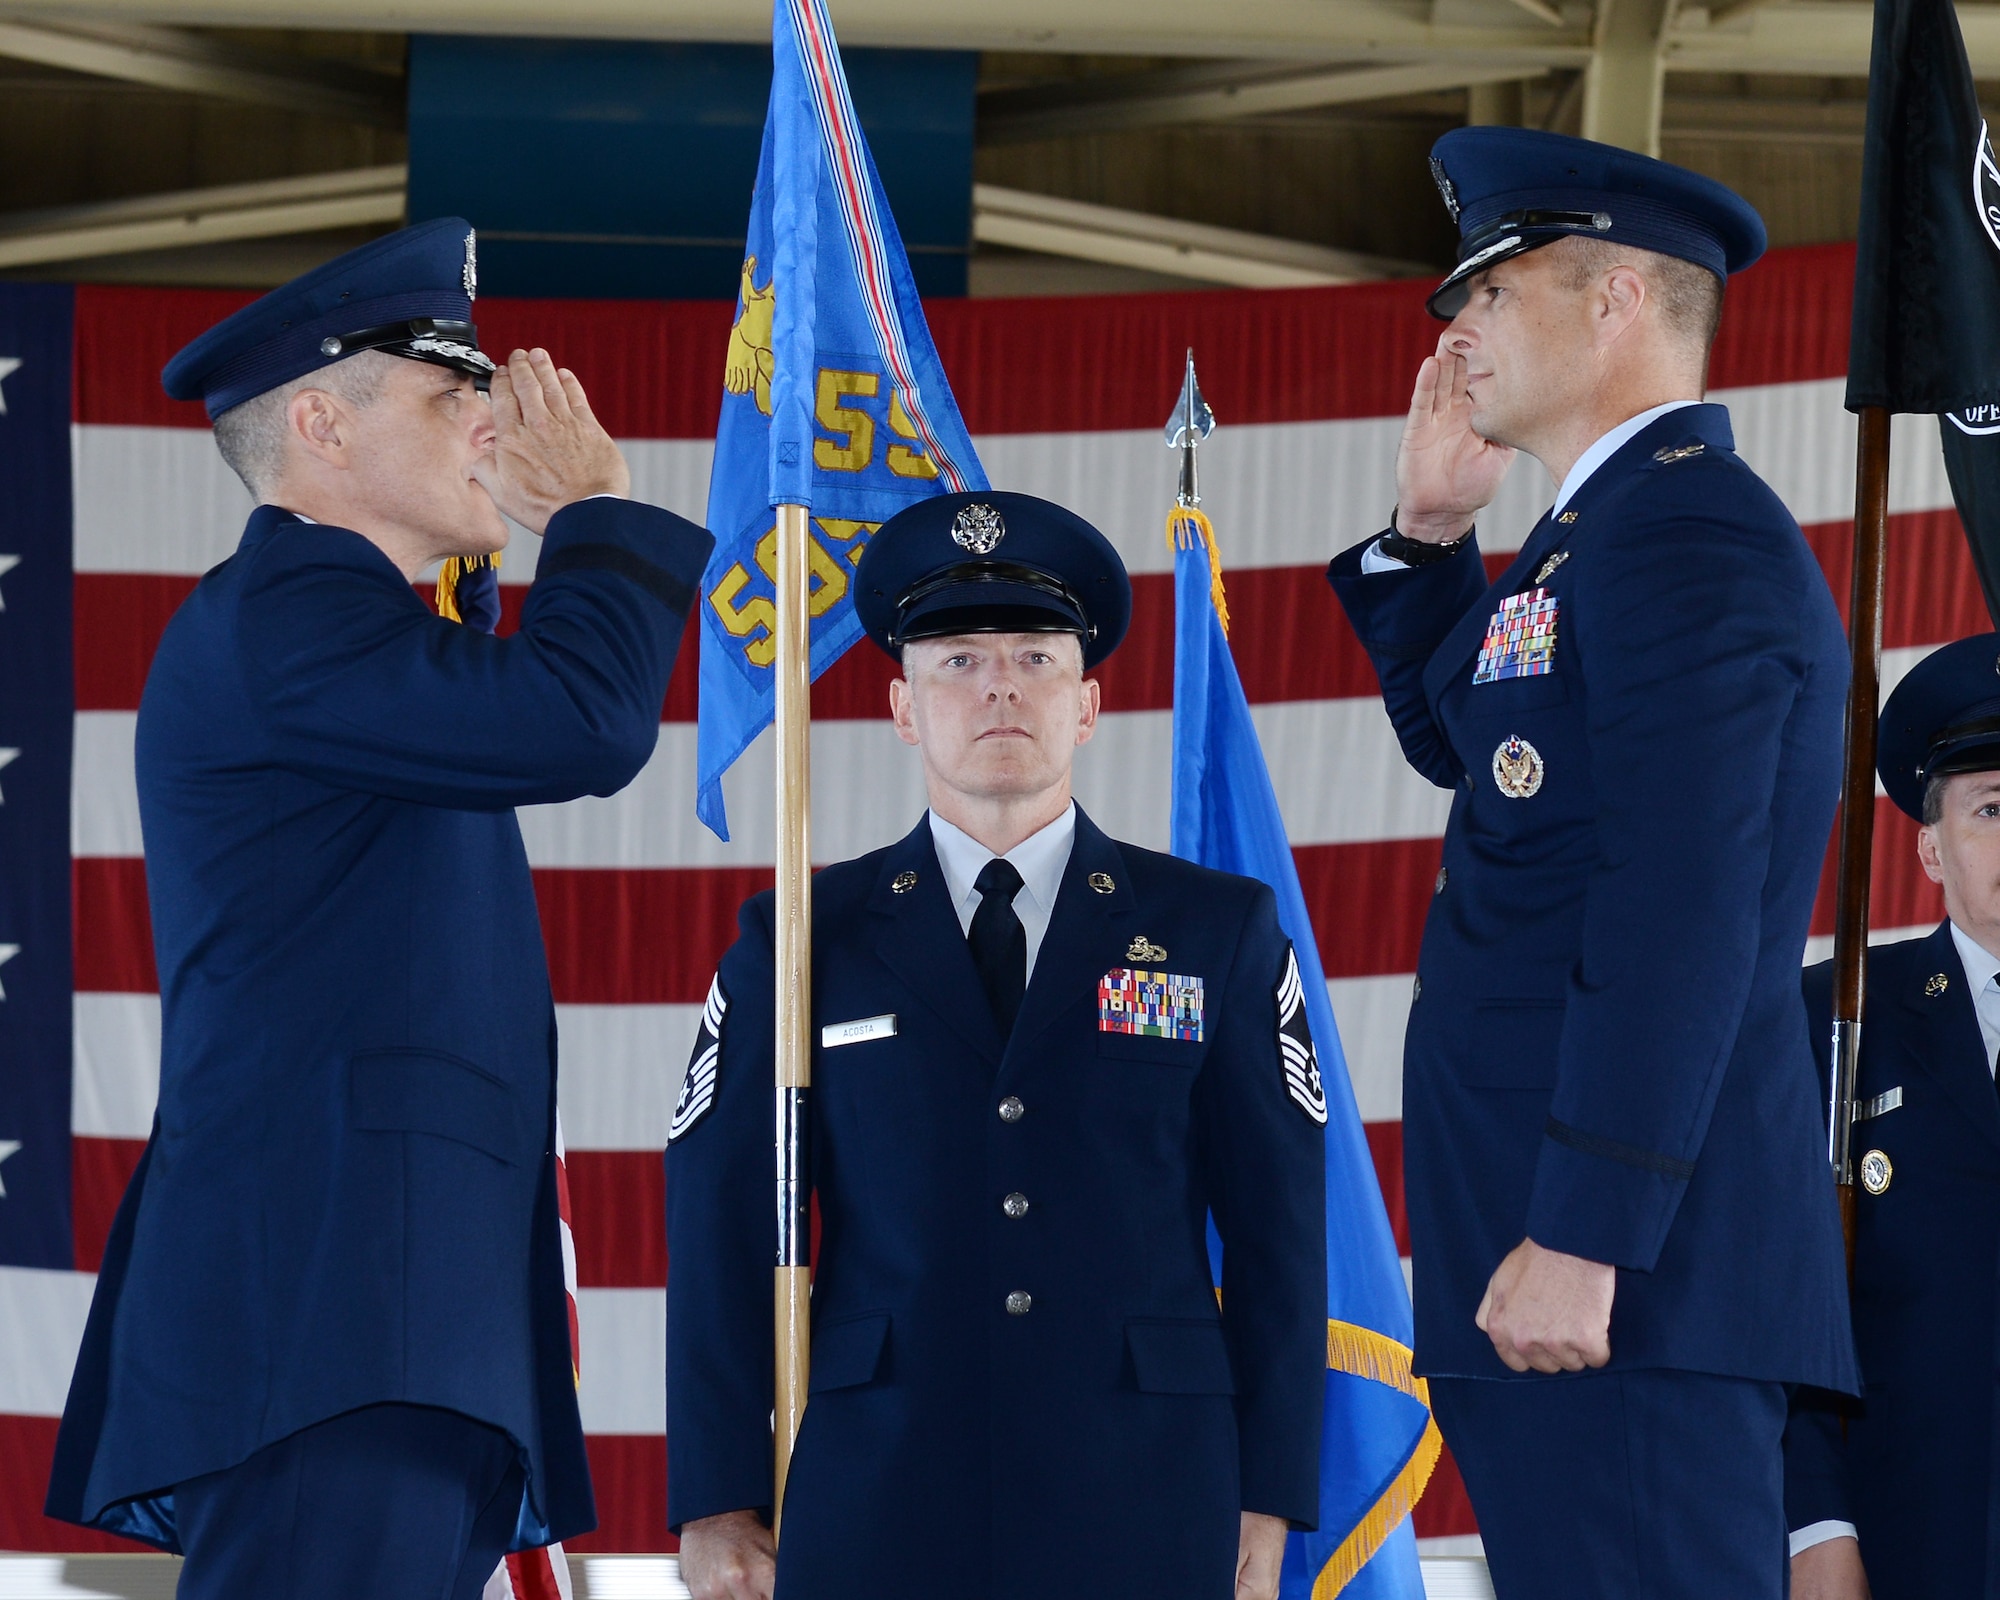 U.S. Air Force Maj. Gen. Thomas Bussiere, Eighth Air Force and Joint-Global Strike Operations Center commander (left) and U.S. Air Force Col. Jeremiah Baldwin, incoming 595th C2G commander and National Airborne Operations Center commander (right), exchange salutes during the dual-595th Command and Control Group and NAOC change of command ceremony July 27, 2018, at Offutt Air Force Base, Nebraska as a single commander assumed responsibility for both organizations. (U.S. Air Force photo by Charles Haymond)